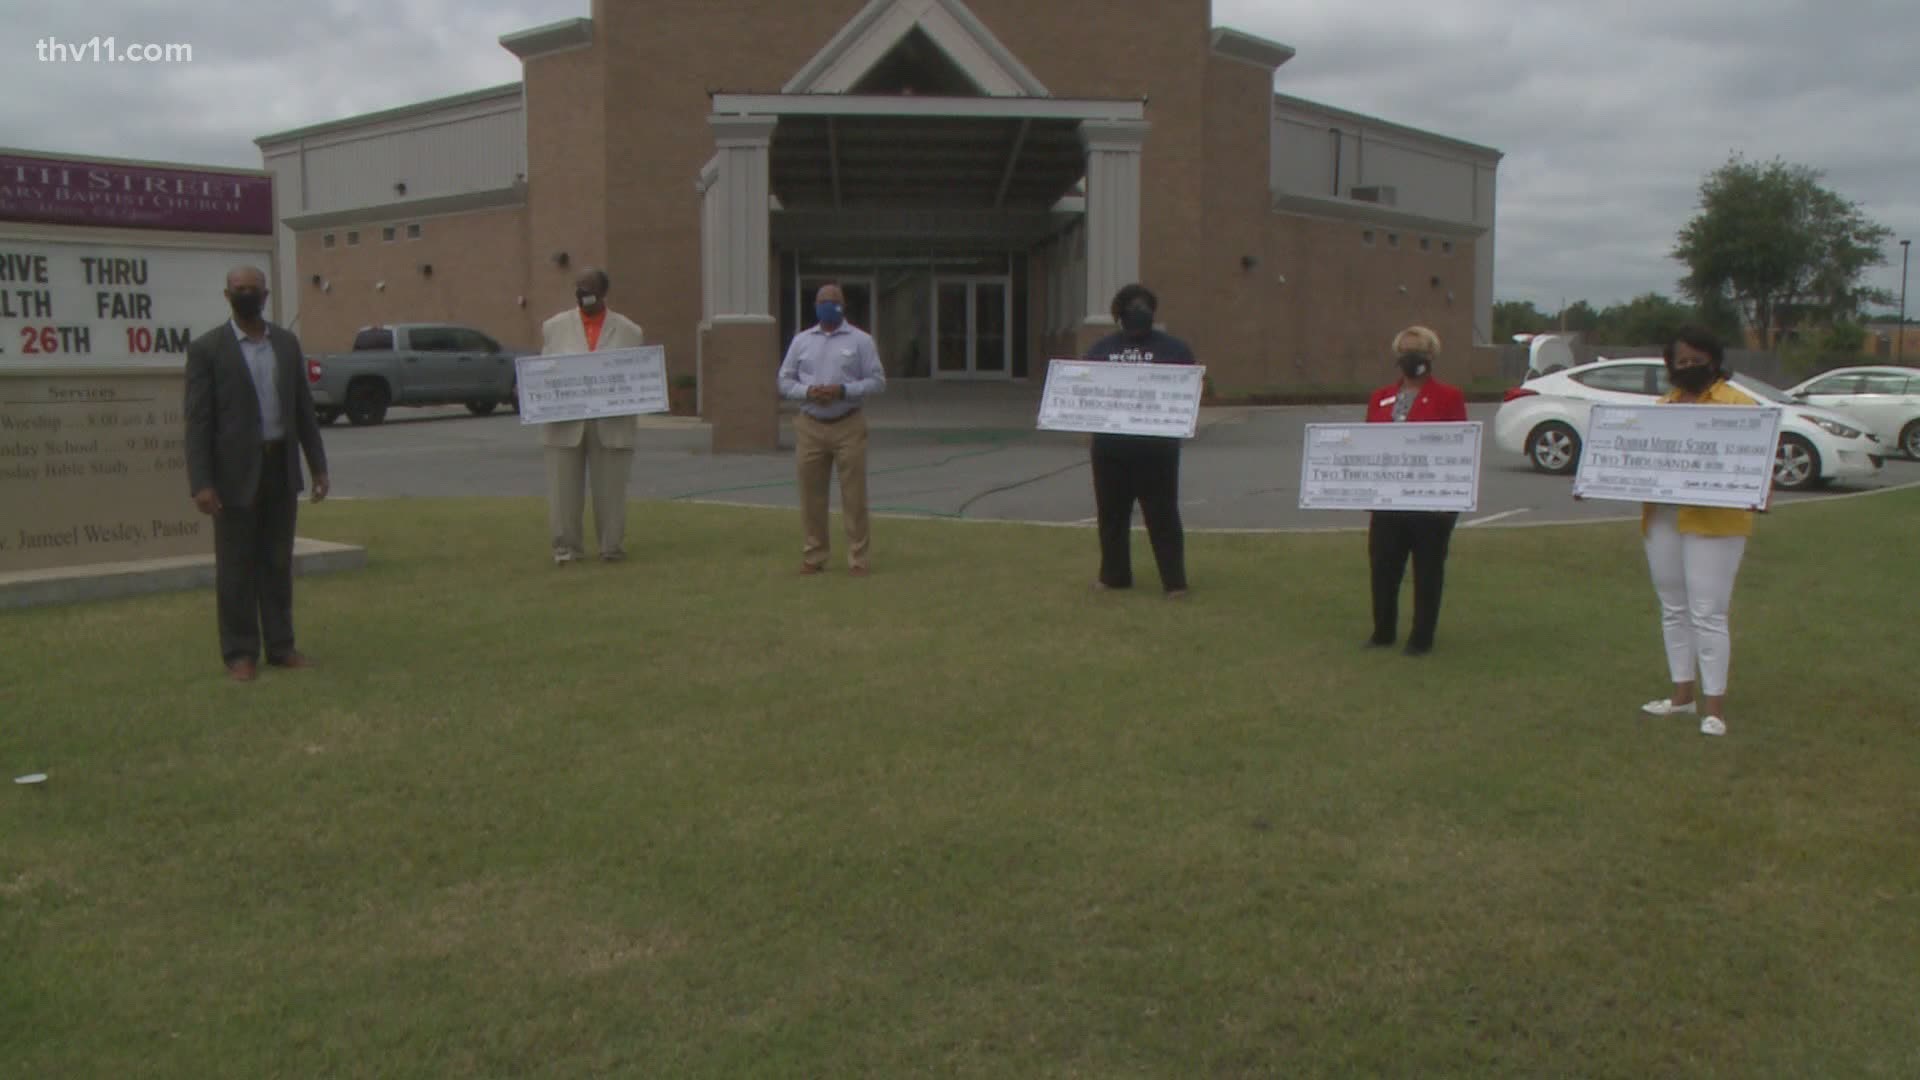 Four central Arkansas schools have received a surprise donation to help them get through a very challenging year.